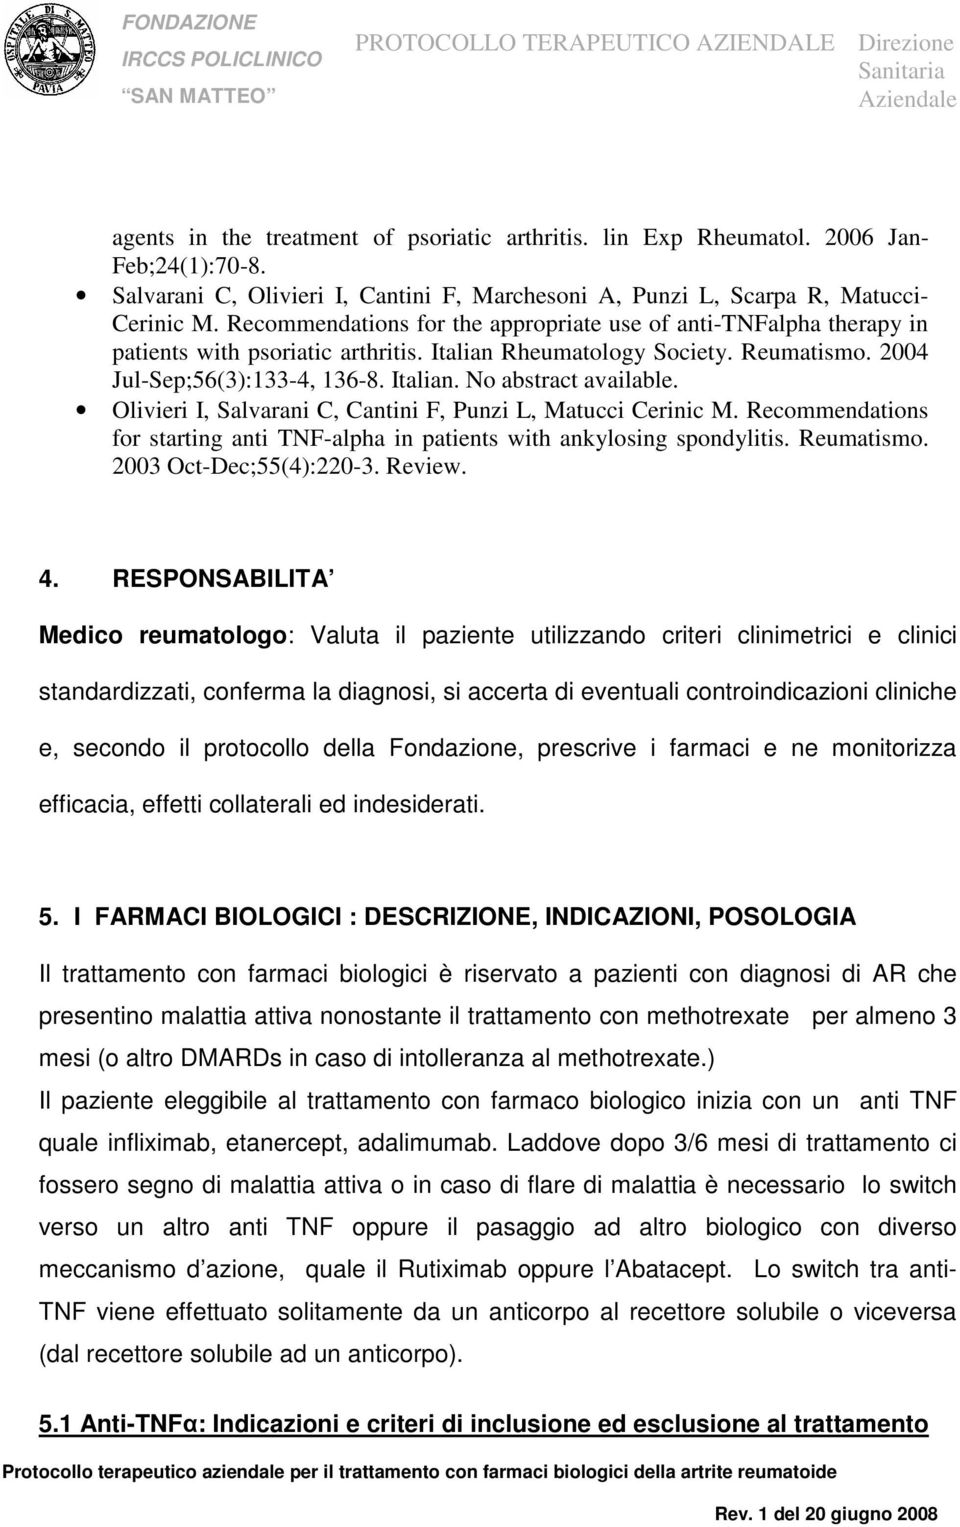 Olivieri I, Salvarani C, Cantini F, Punzi L, Matucci Cerinic M. Recommendations for starting anti TNF-alpha in patients with ankylosing spondylitis. Reumatismo. 2003 Oct-Dec;55(4):220-3. Review. 4.